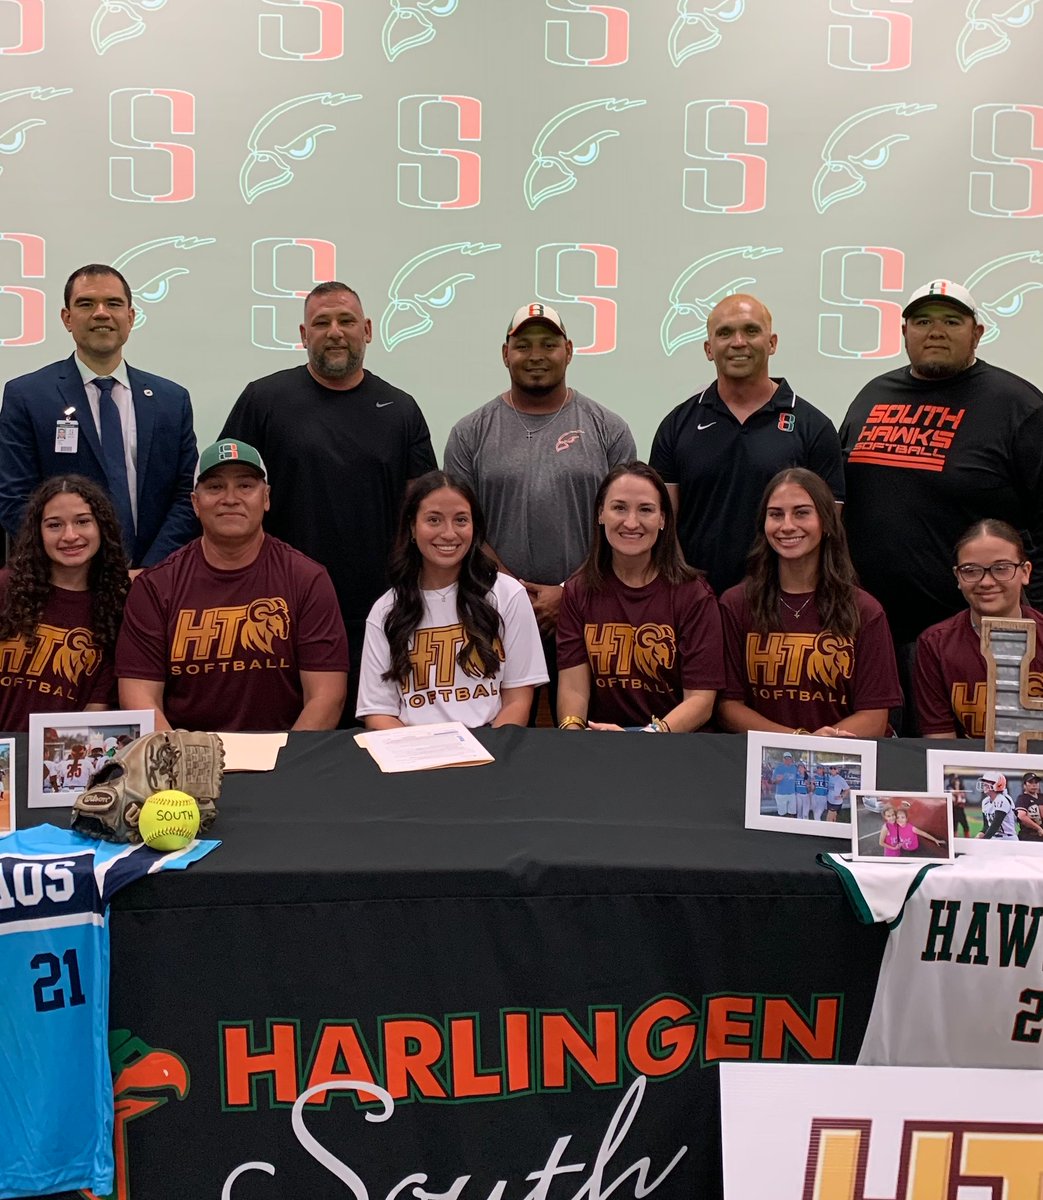 Big Congratulations to Harlingen High School South student-athlete, Emily Ruiz, who just signed her letter of intent for the Huston-Tillotson Softball team! We wish you all the best for next year!